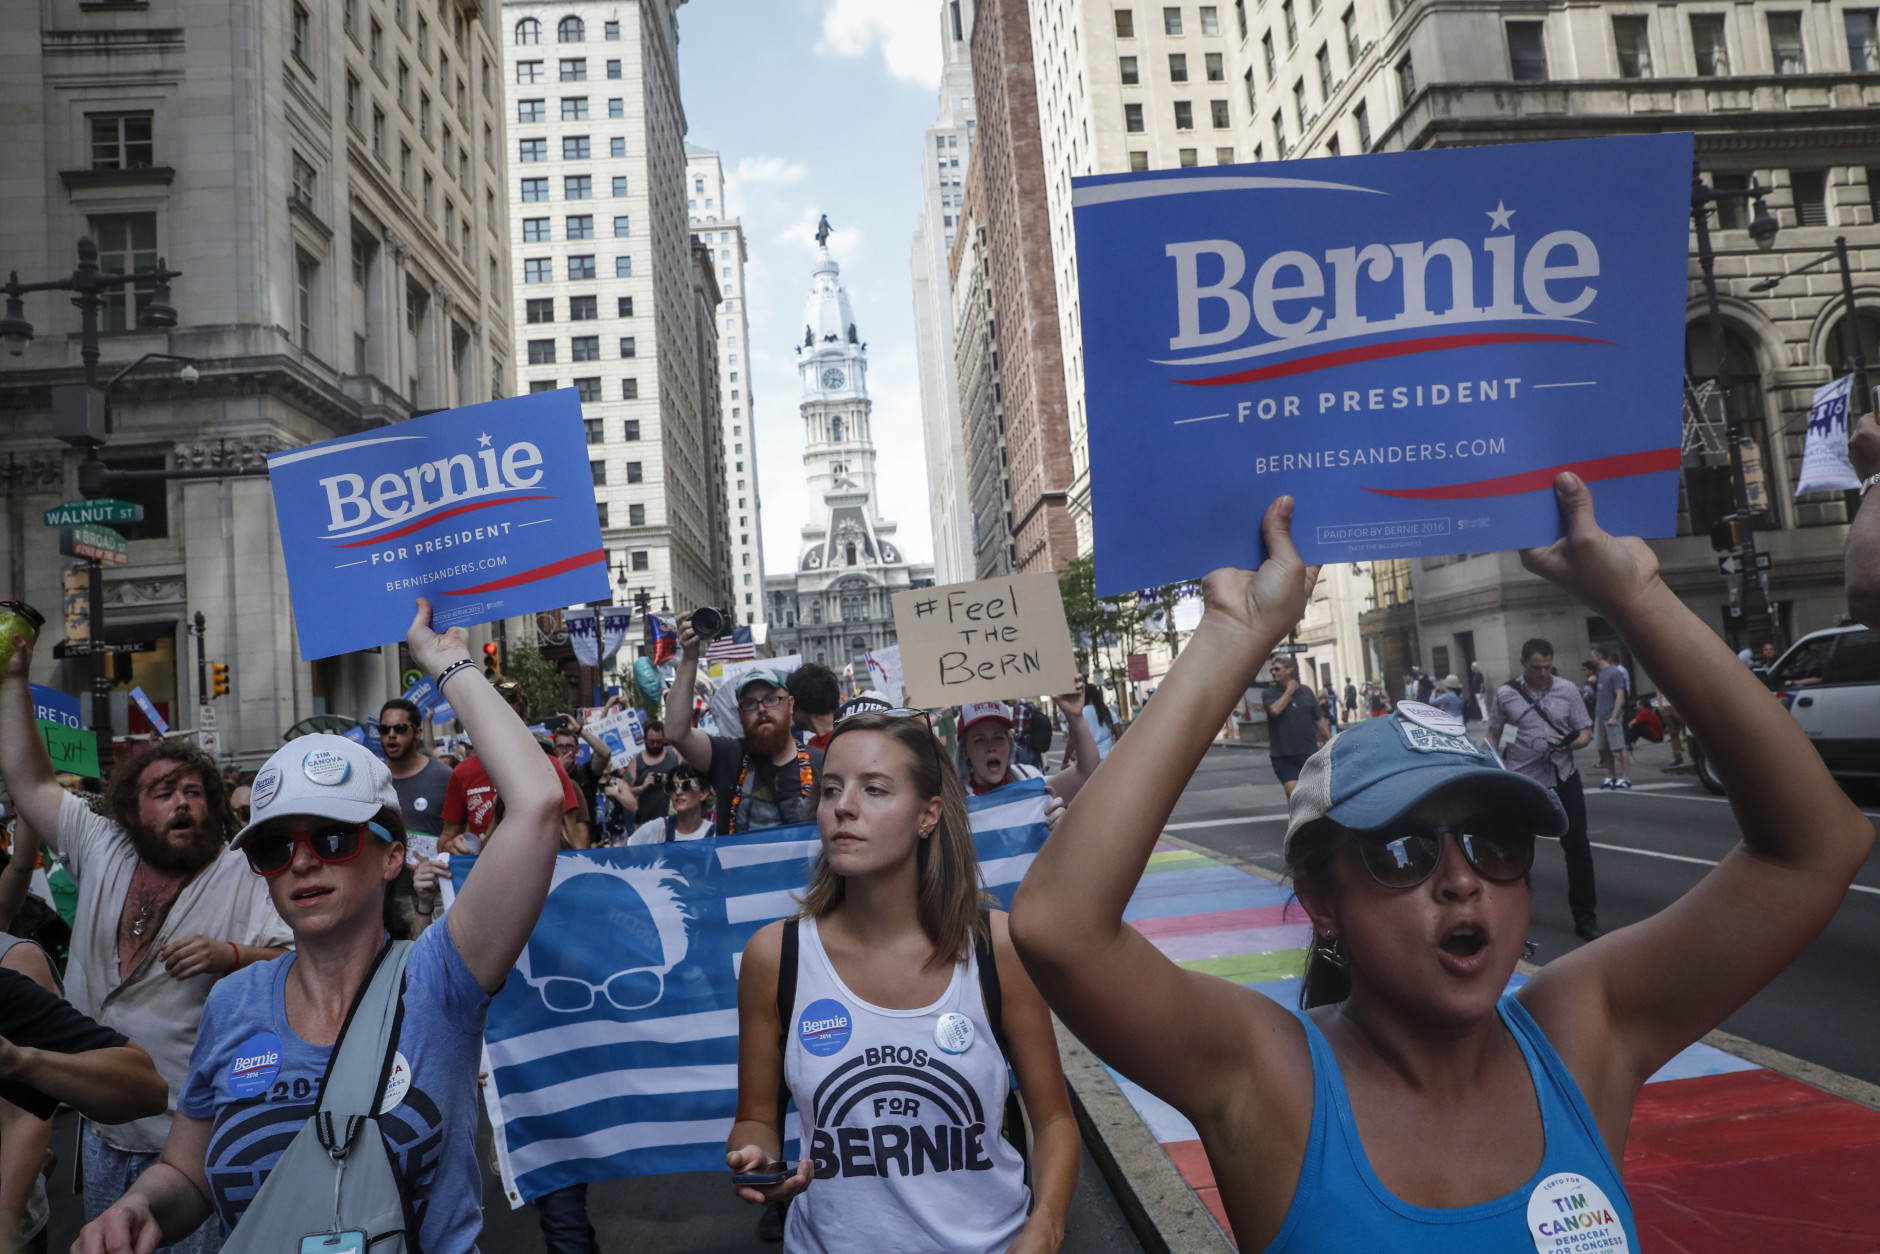 Supporters of Sen. Bernie Sanders, I-Vt., march during a protest in downtown on Sunday, July 24, 2016, in Philadelphia. The Democratic National Convention starts Monday in Philadelphia. (AP Photo/John Minchillo)